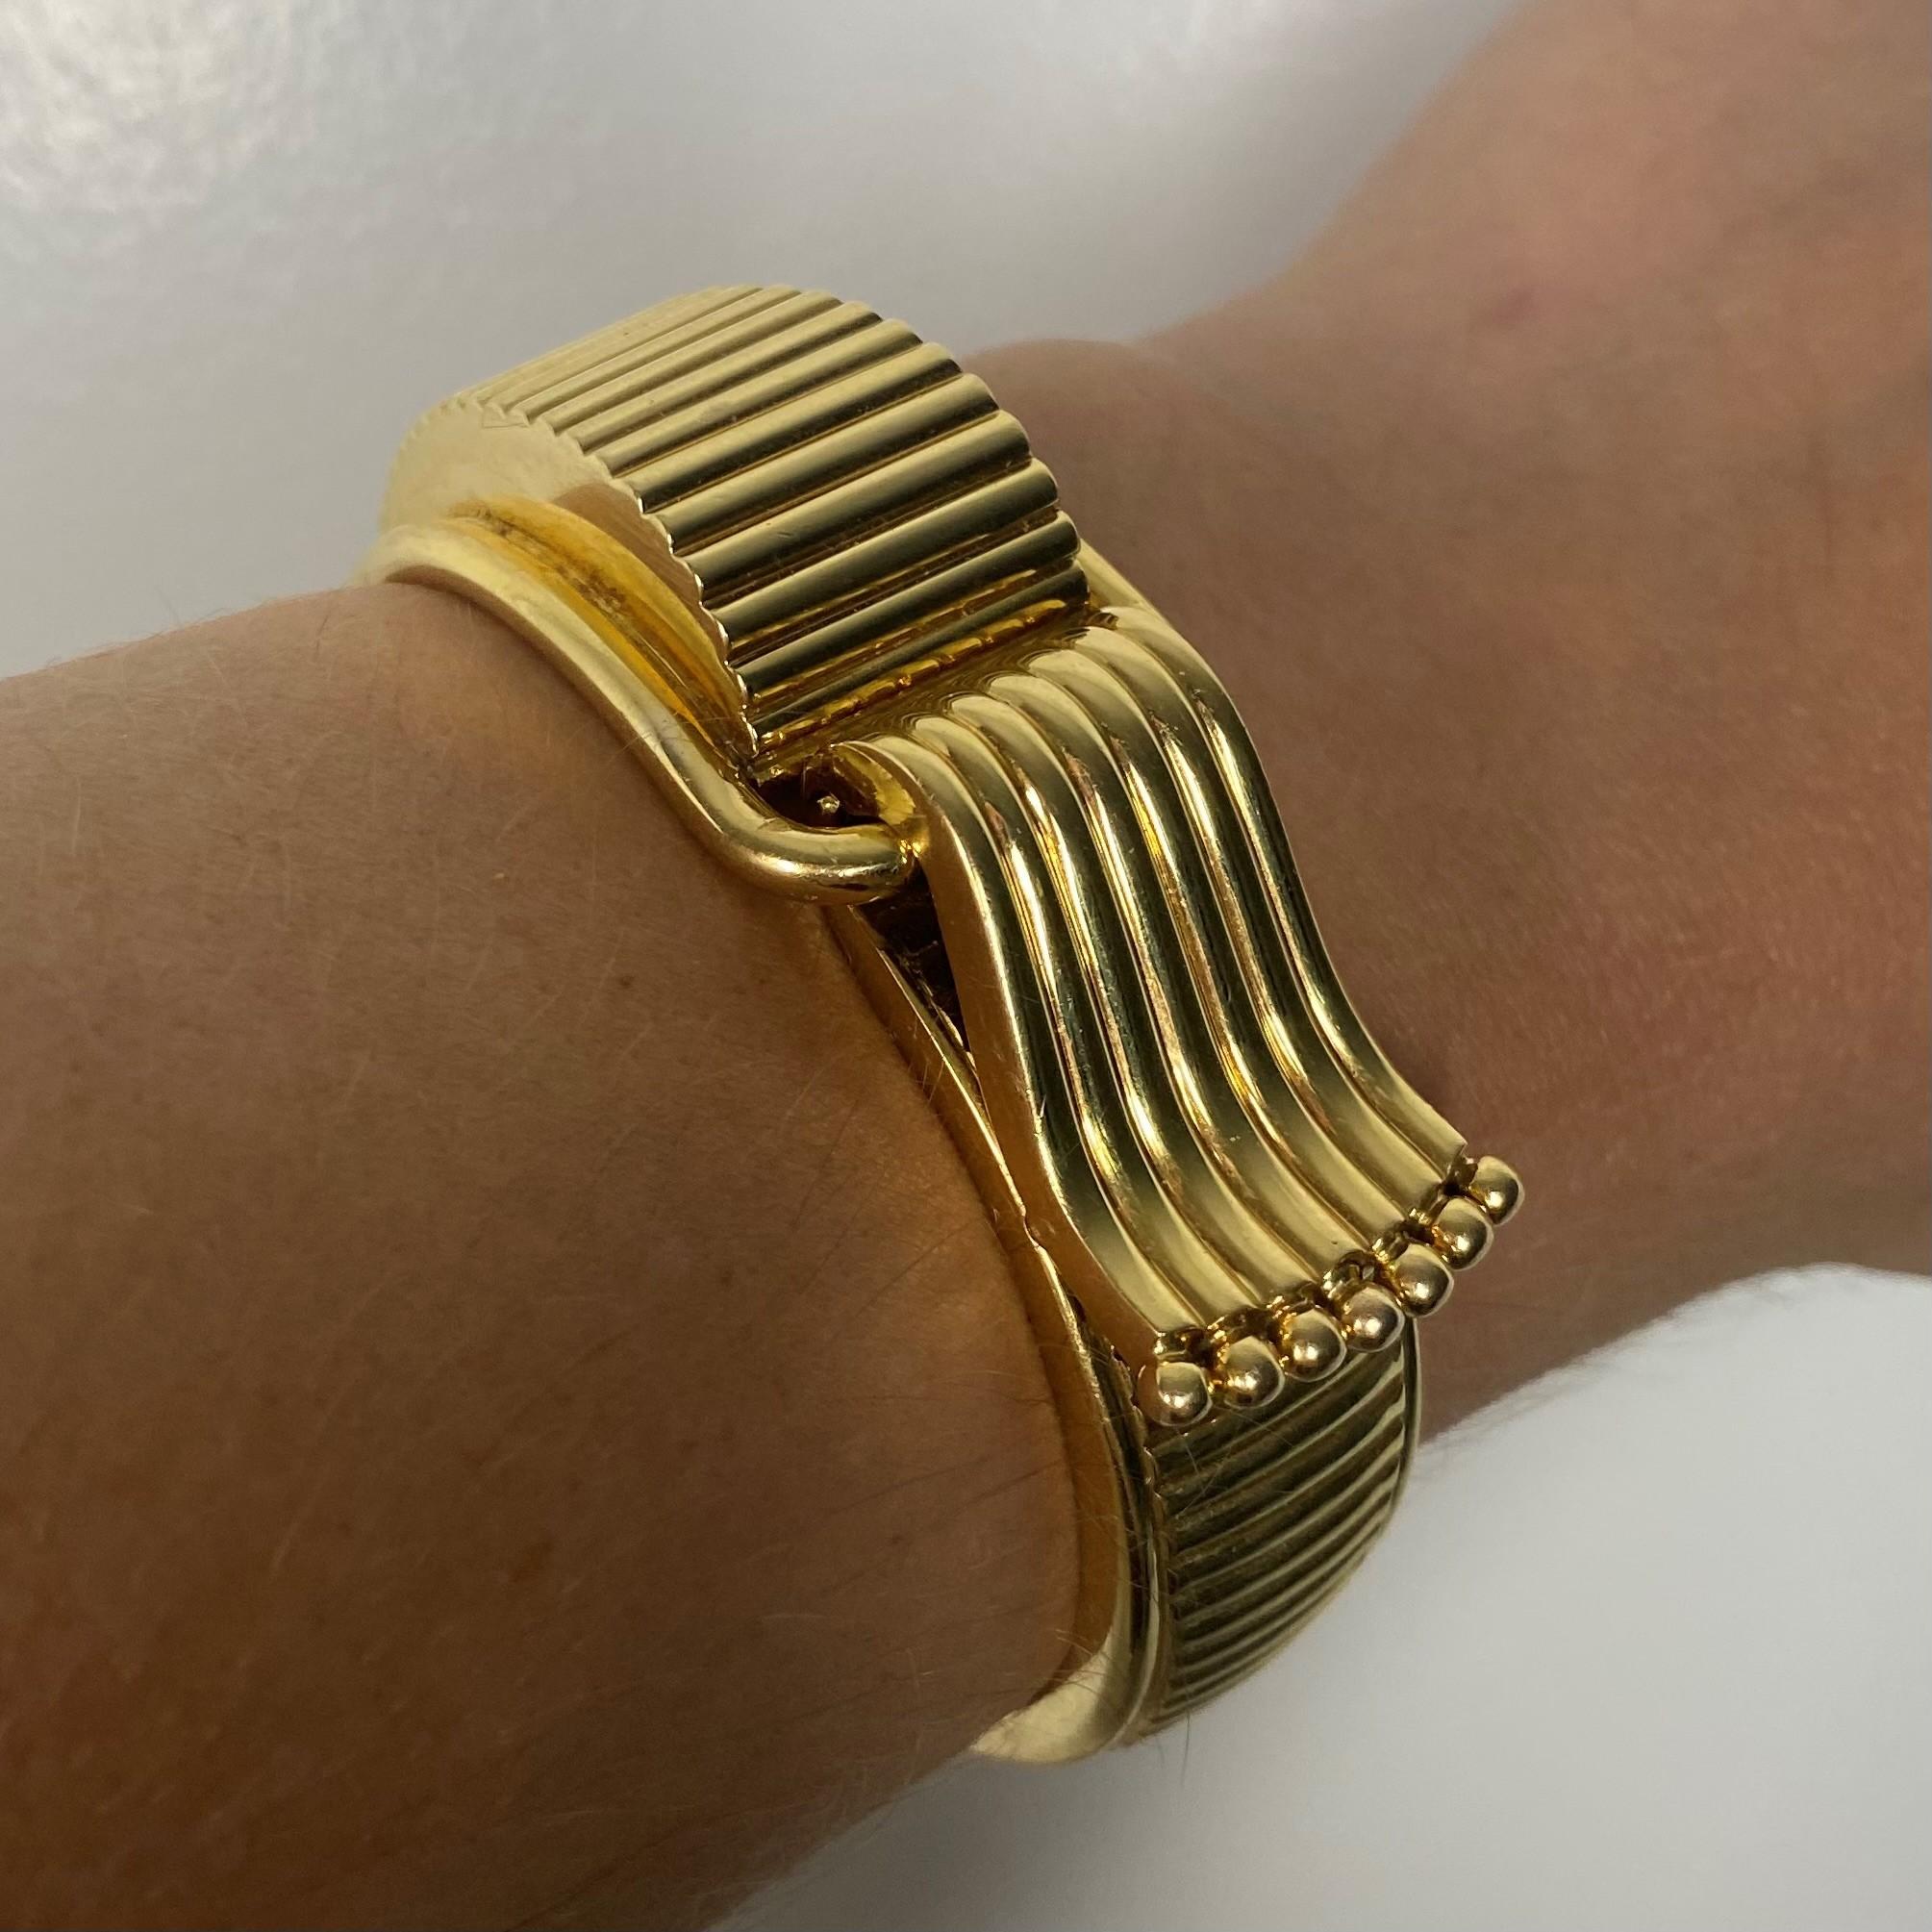 Machine age bold bangle bracelet.

Magnificent three dimensional bold piece created during the art deco period, back in the 1930's. This voluminous bangle bracelet has been crafted with machine age patterns in solid yellow gold of 18 karats. The